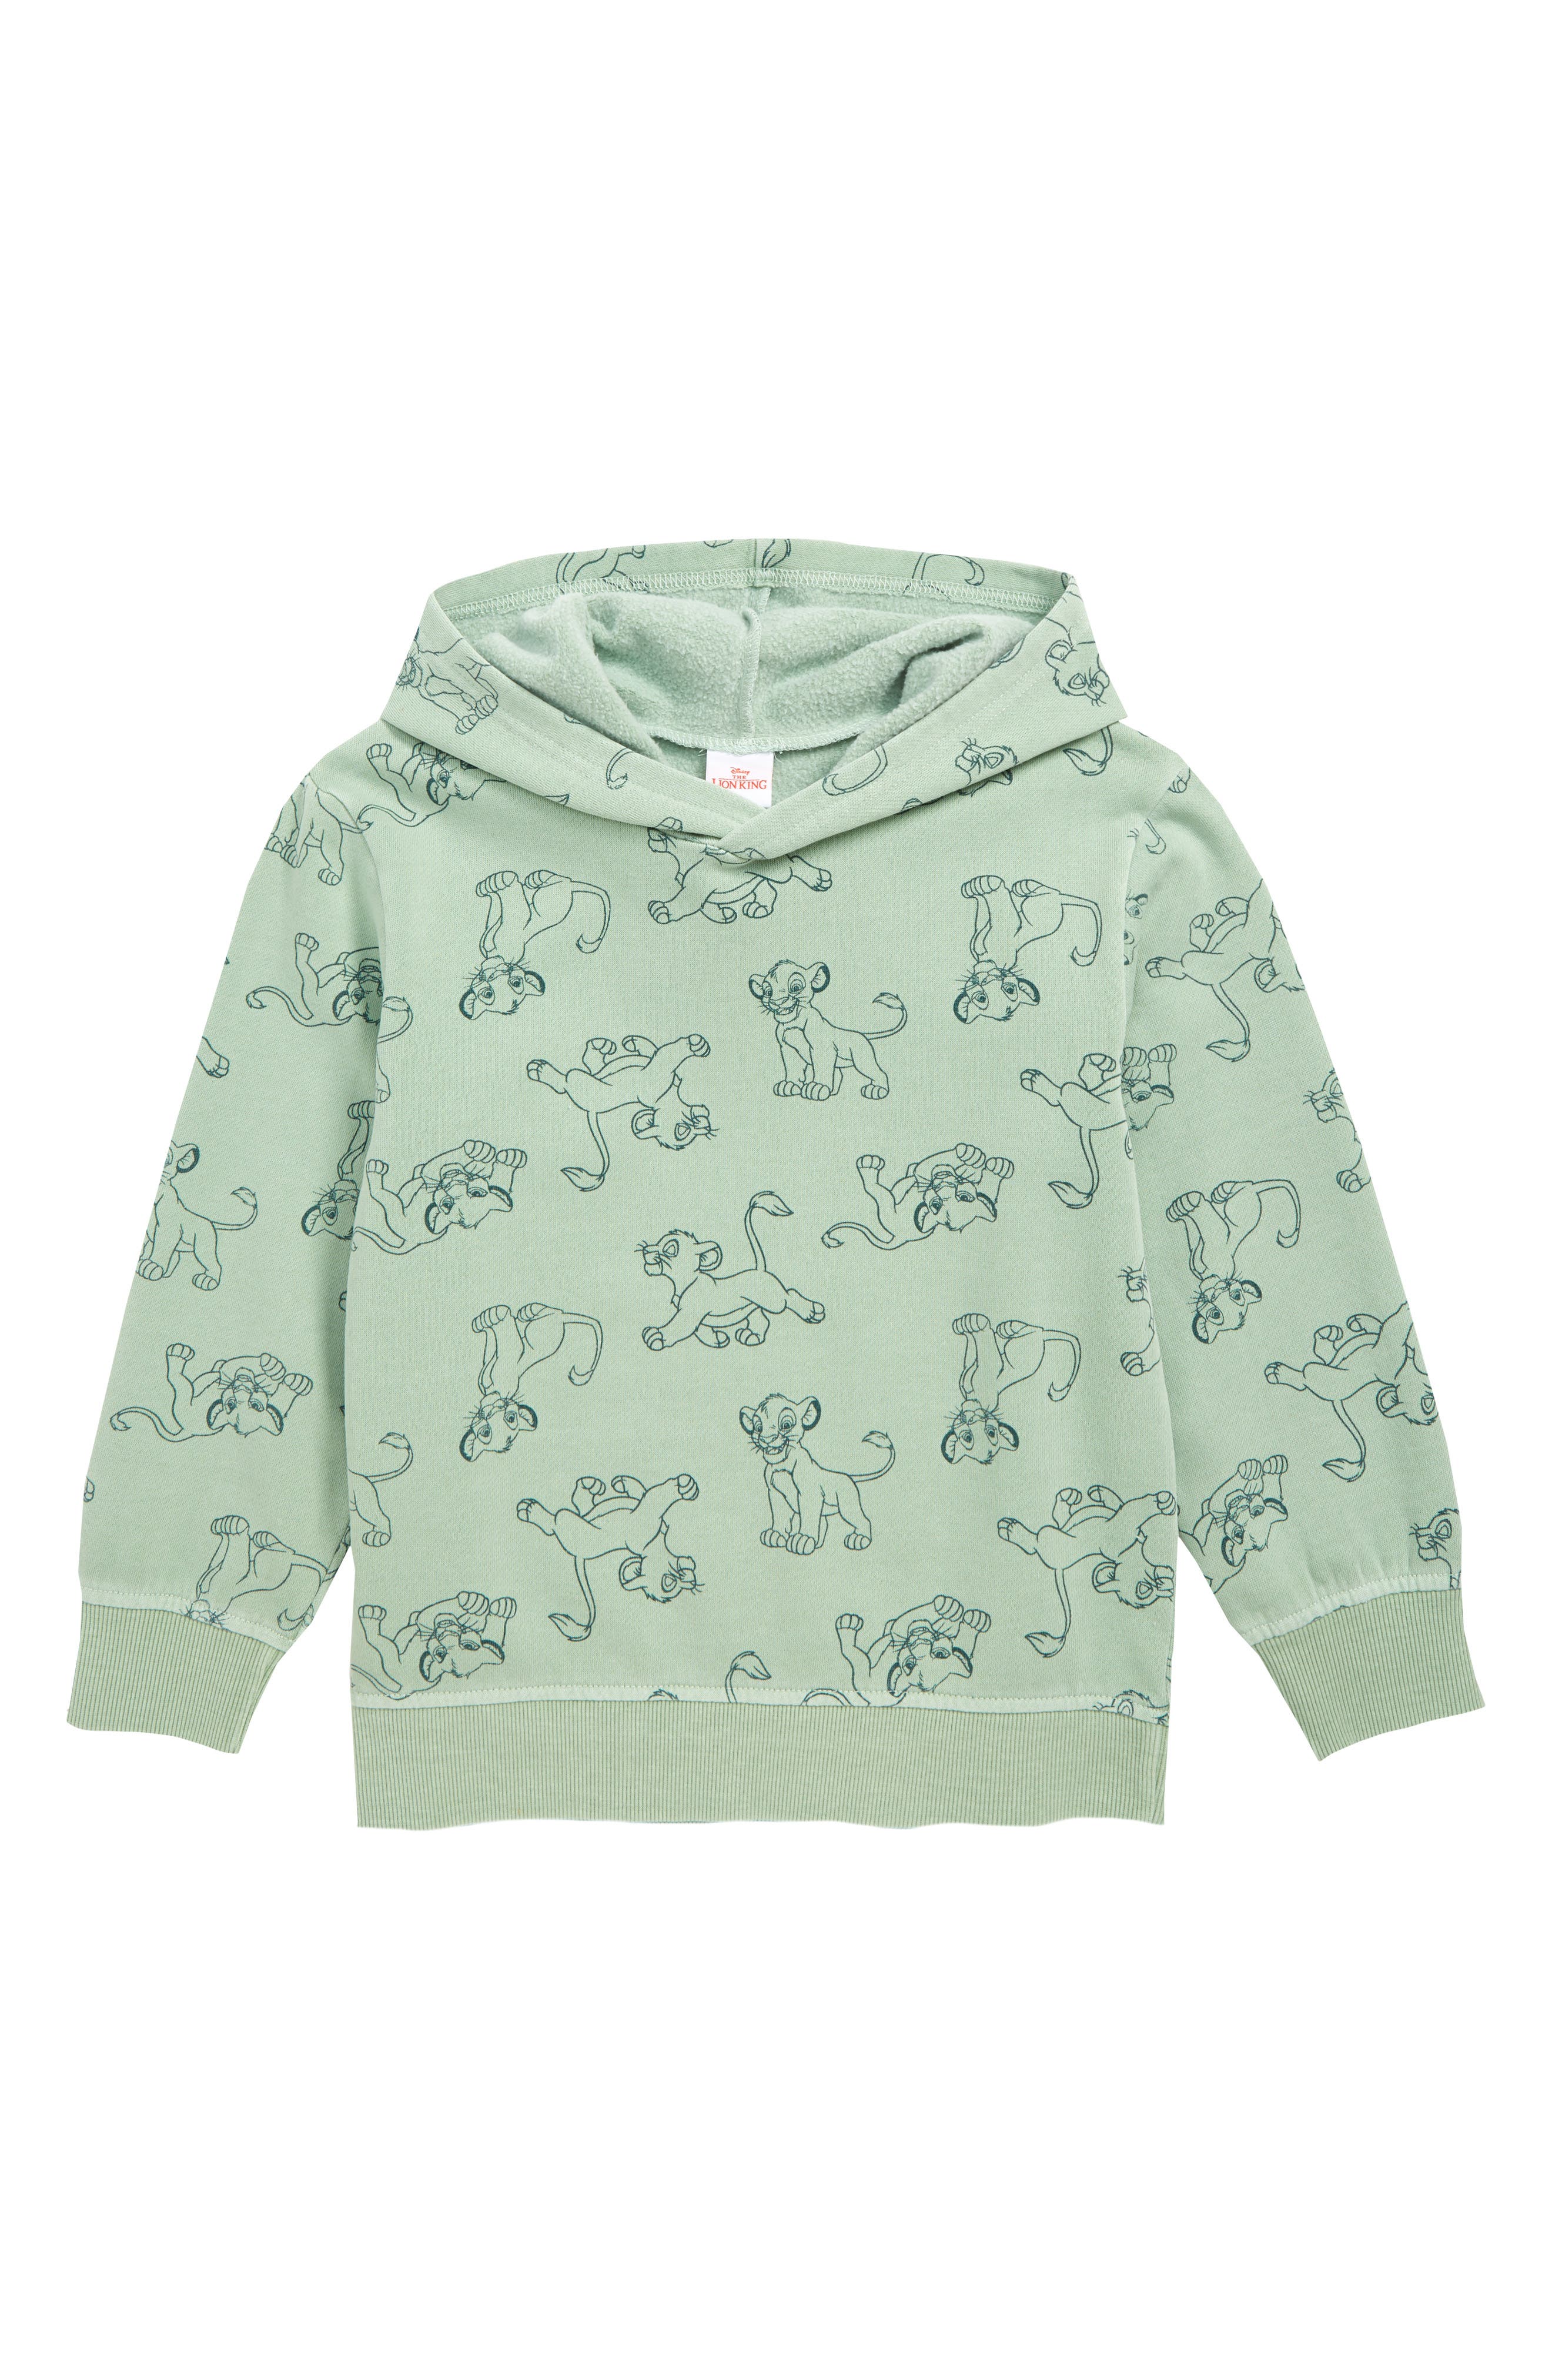 hooded sweatshirts for toddlers